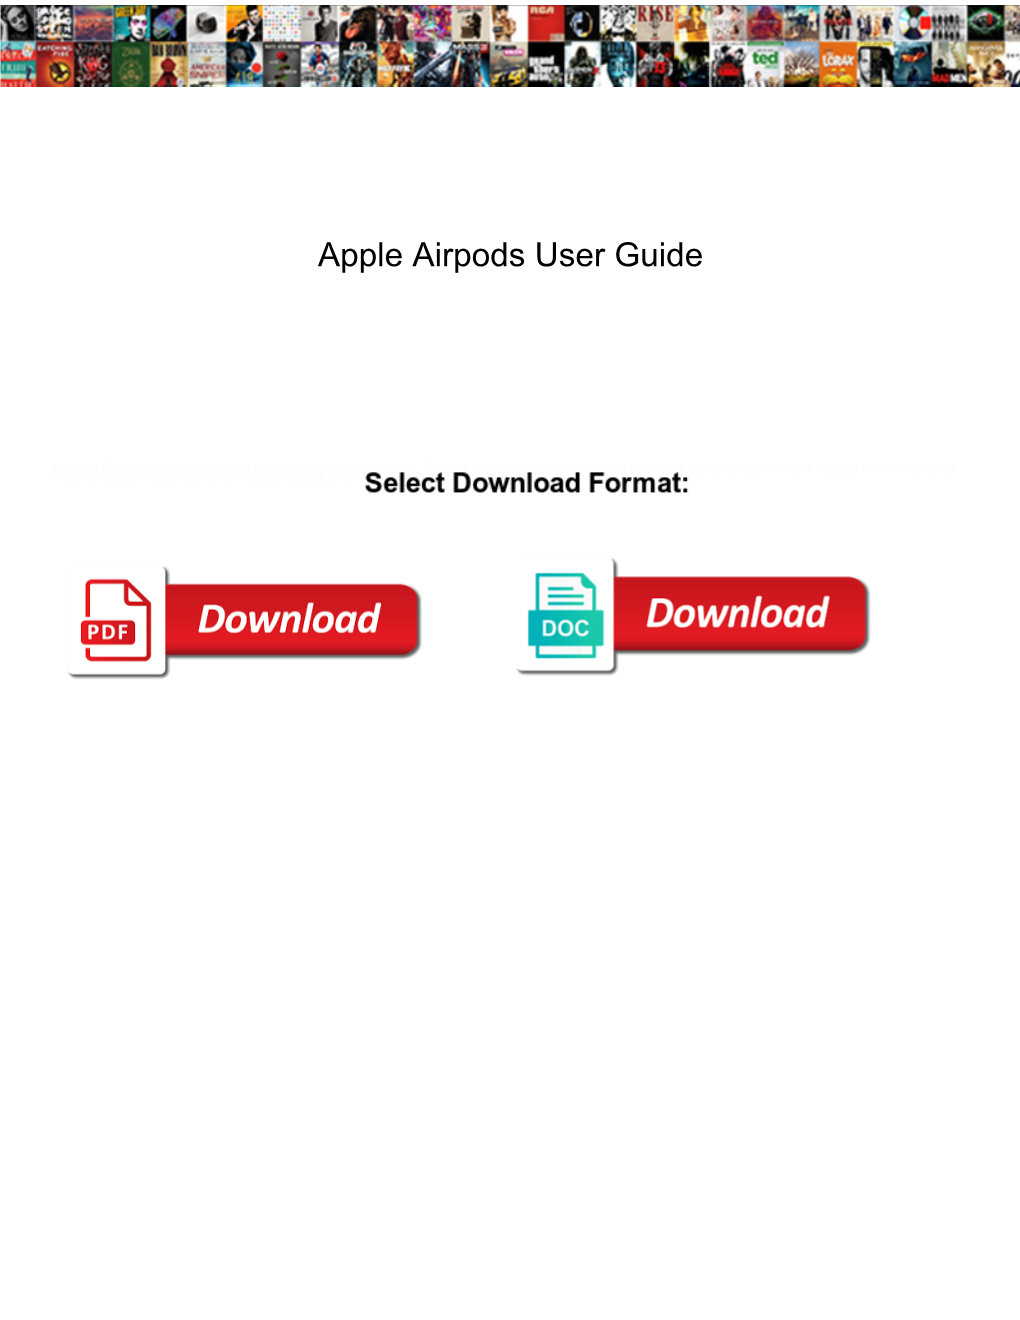 Apple Airpods User Guide